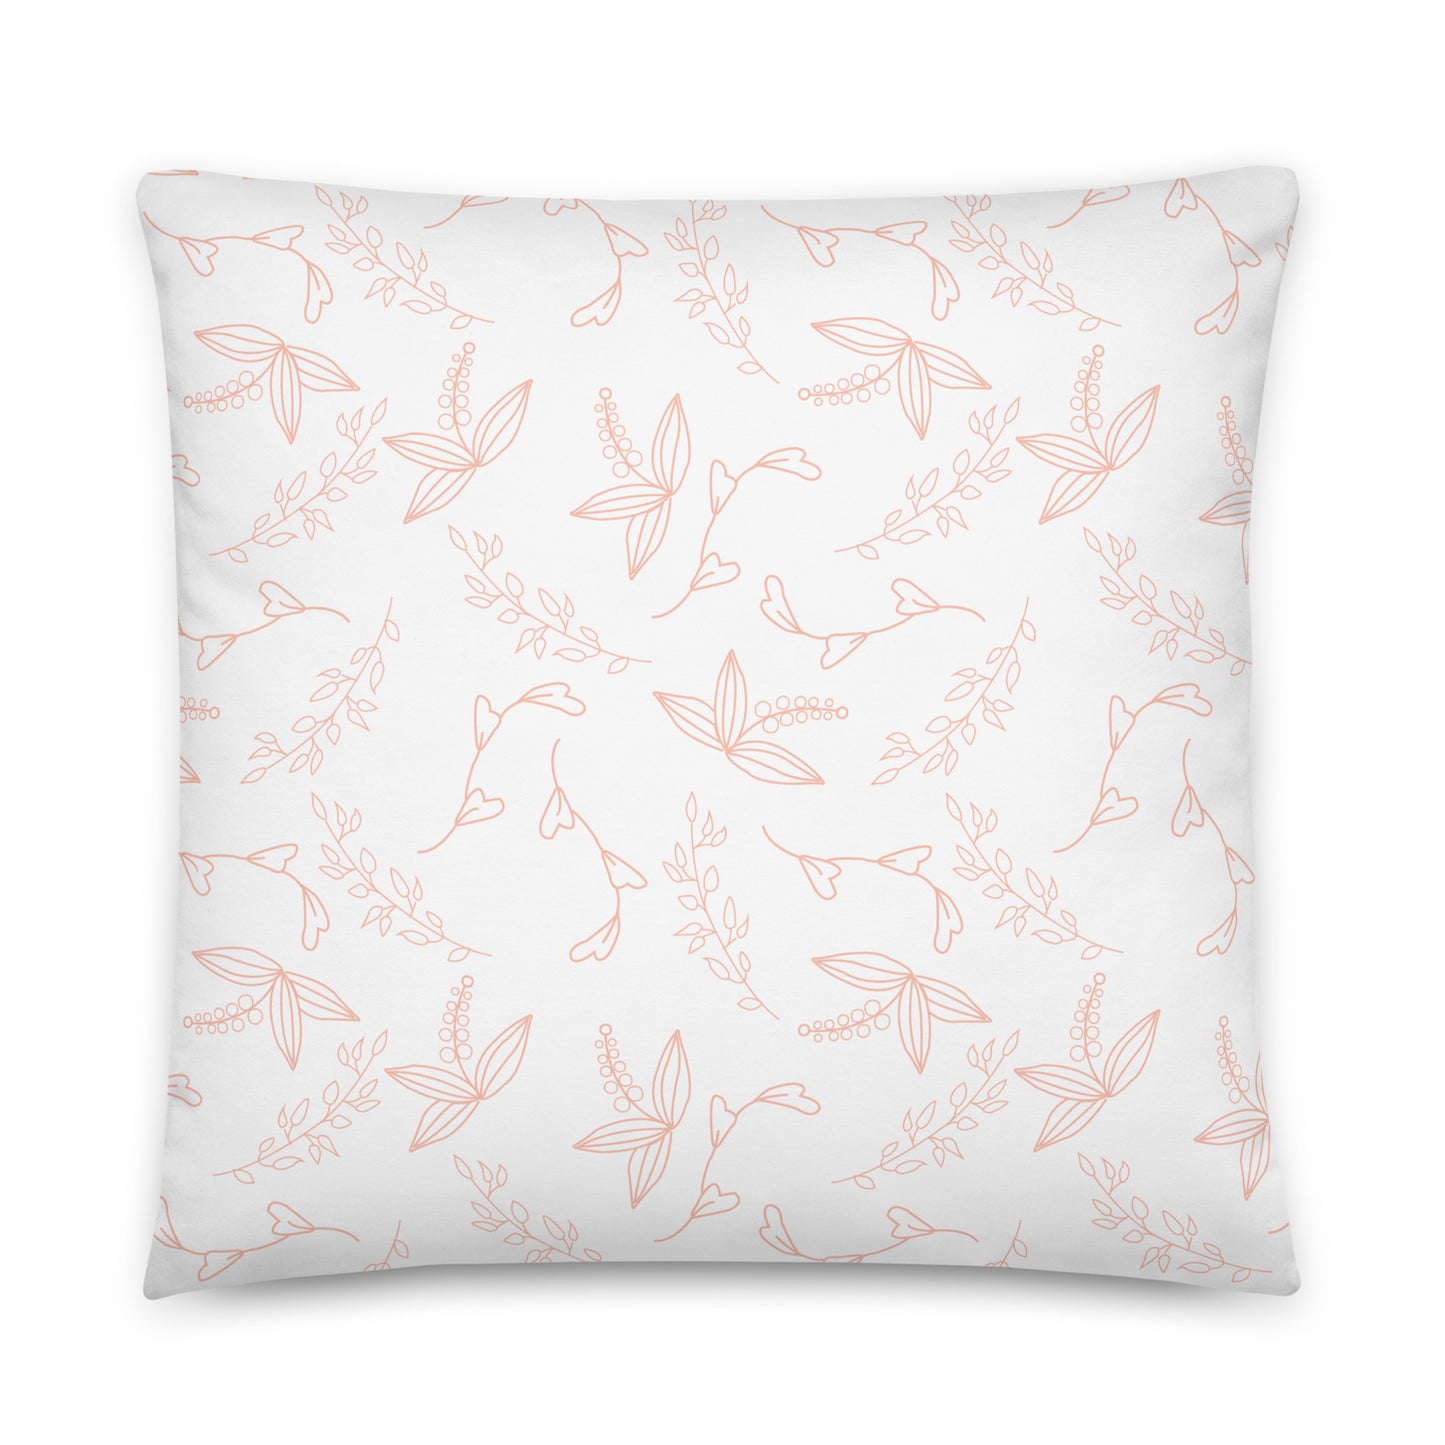 White Floral - Sustainably Made Pillows